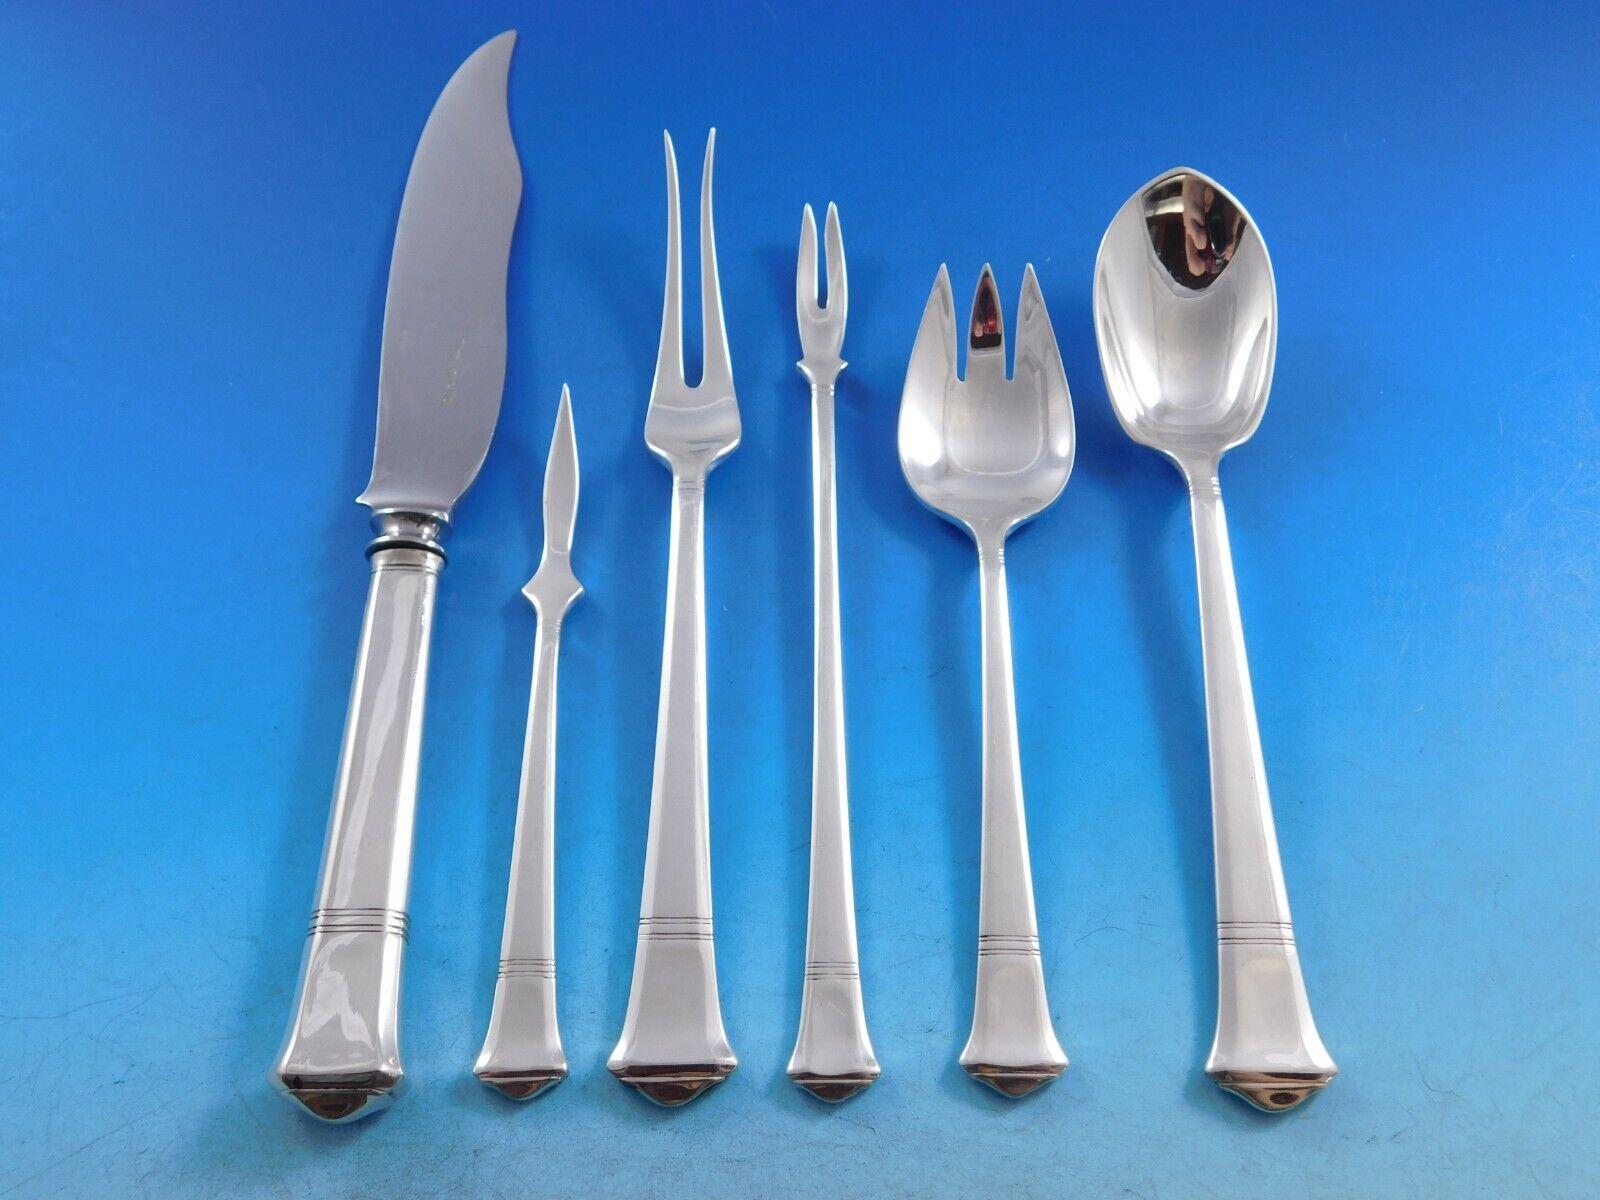 Designed with an eye for balance and proportion, each piece of Tiffany & Co. flatware is a masterpiece of form and function. Windham was first introduced by Tiffany in 1923. It was named for the Connecticut county that was the boyhood home of